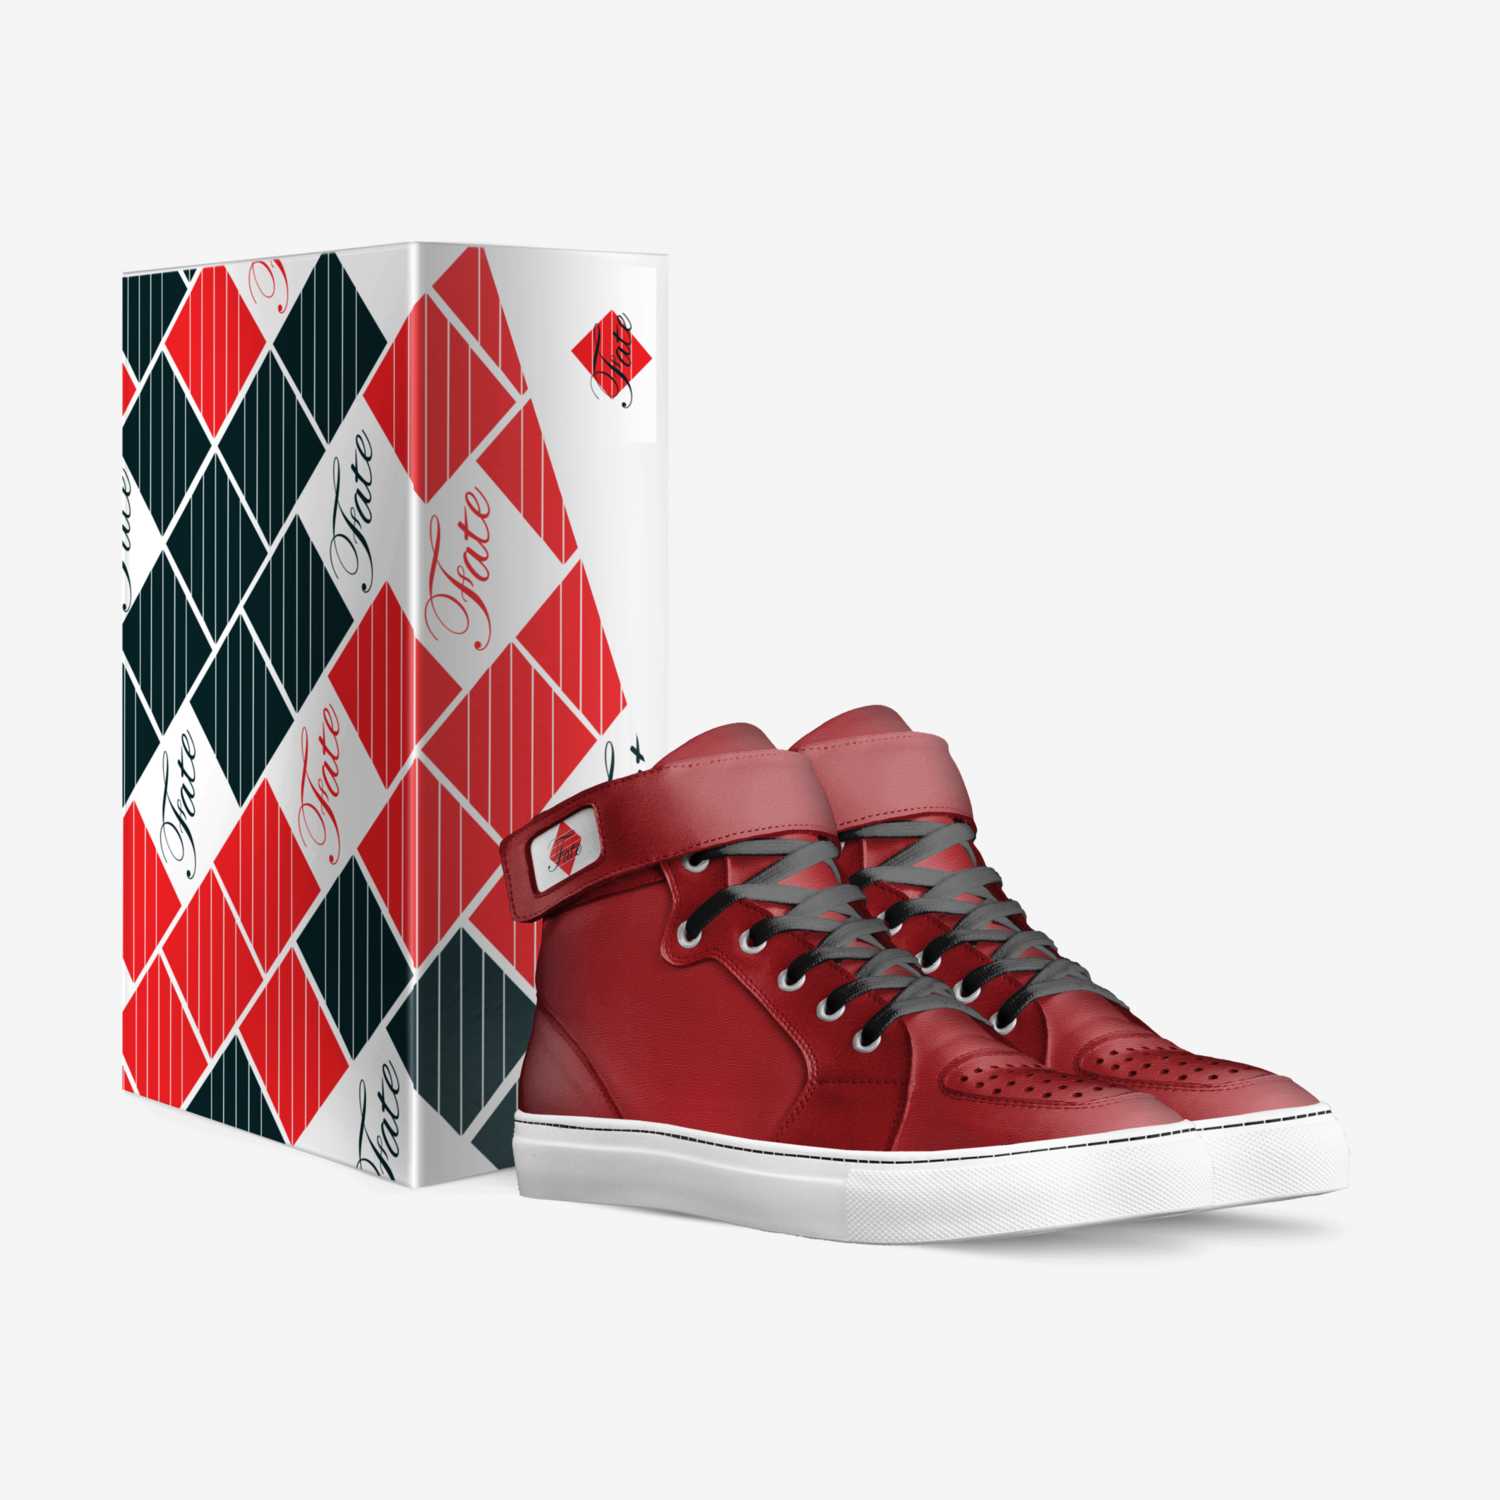 Fate custom made in Italy shoes by Adam Green | Box view